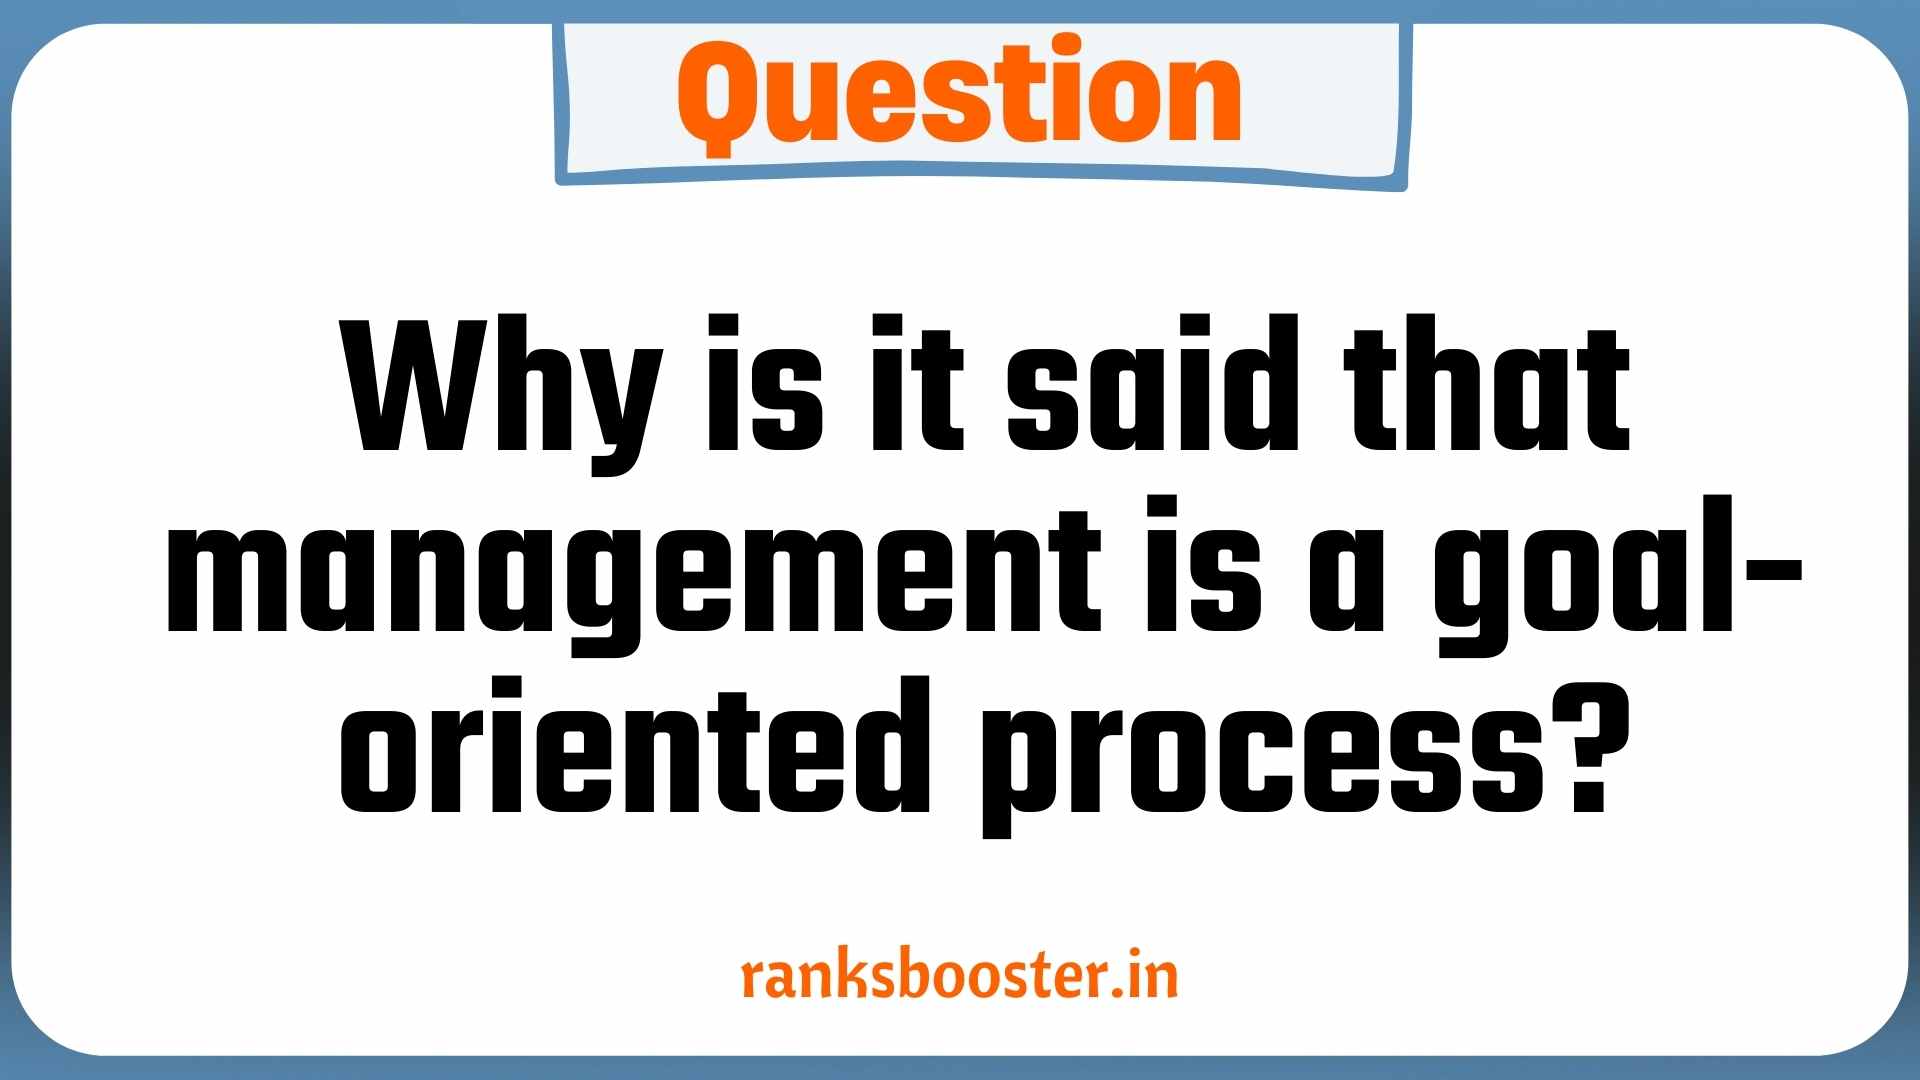 Why is it said that management is a goal-oriented process?